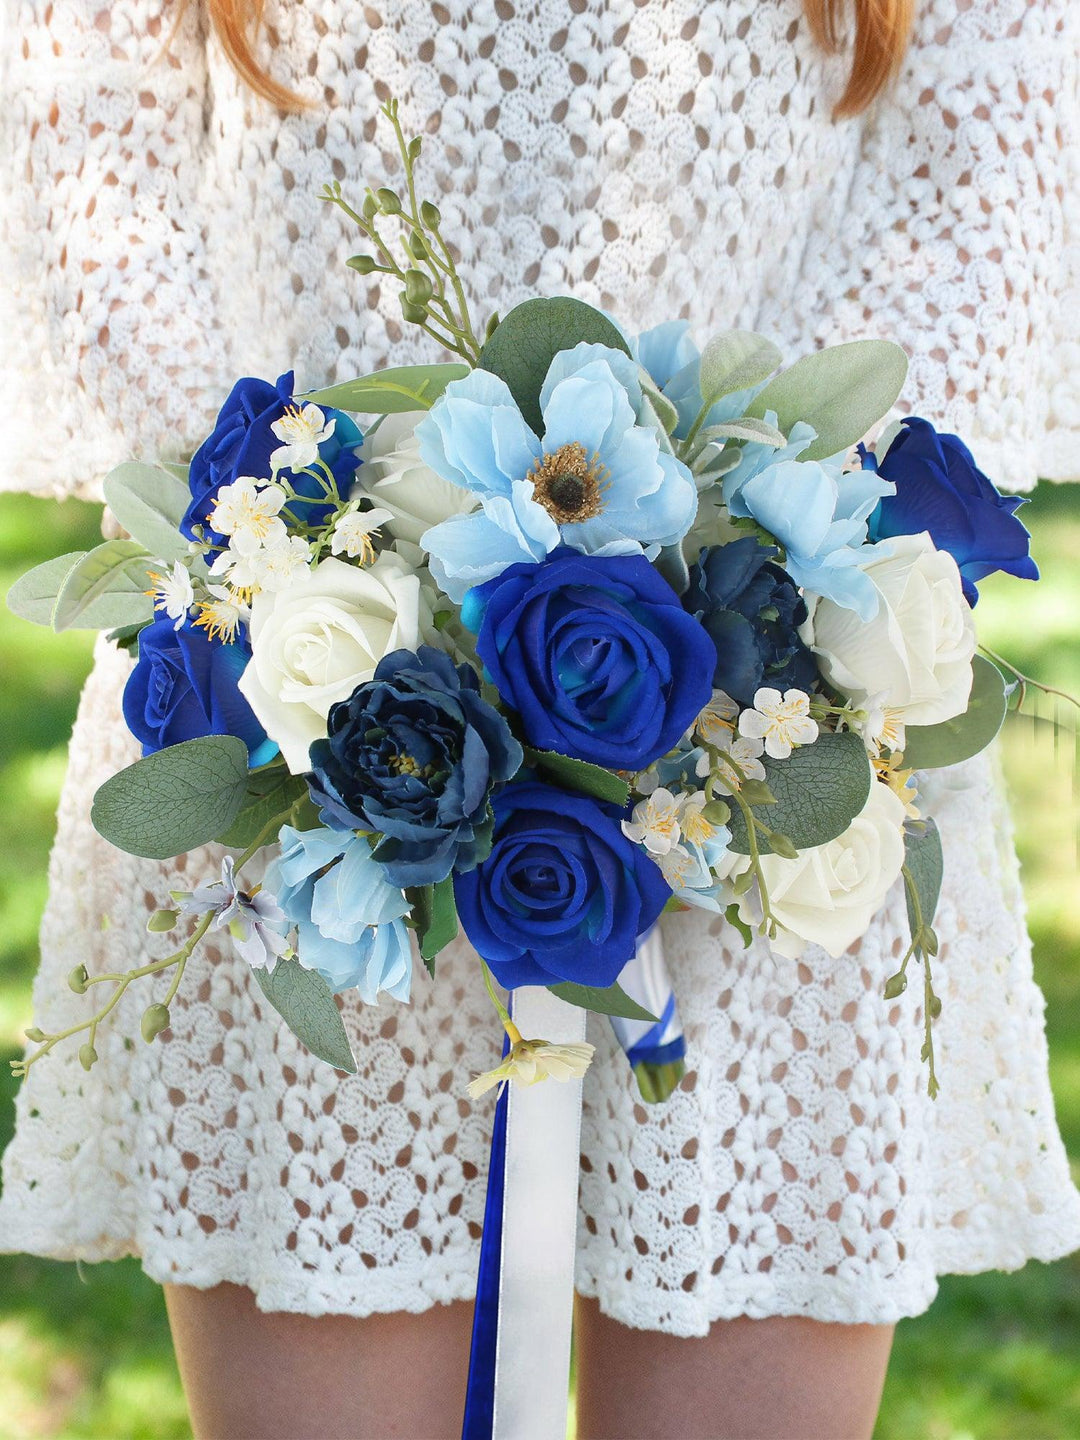 How to Incorporate Bright Colors into Your Summer Wedding Bouquet? - Rinlong Flower